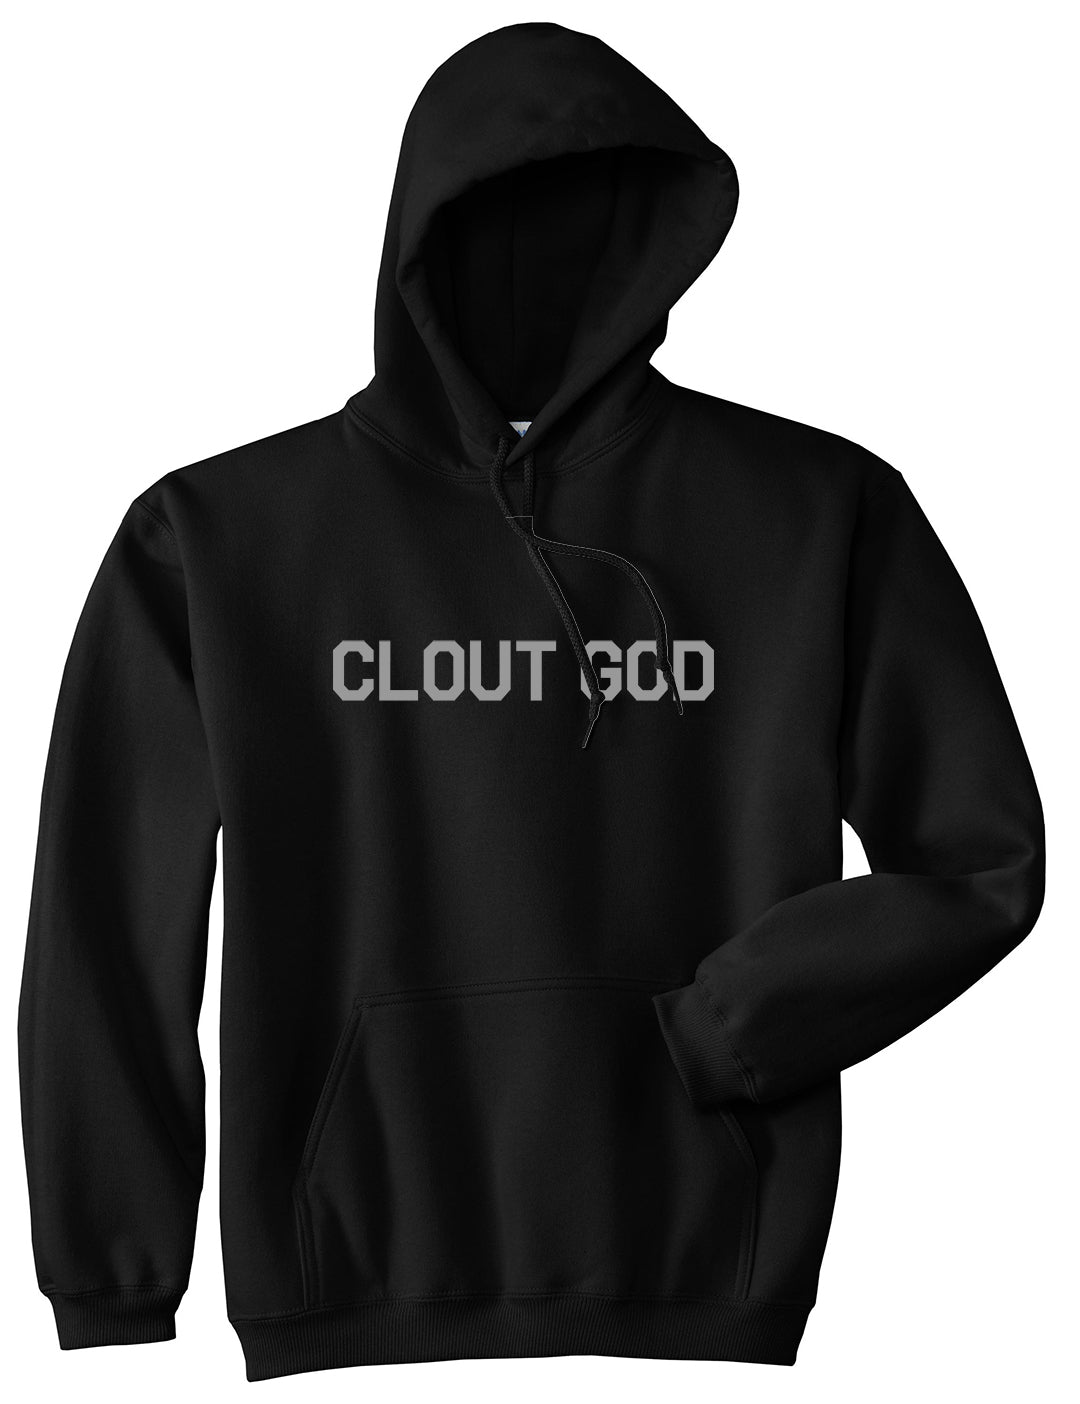 Clout God Mens Pullover Hoodie Black by Kings Of NY